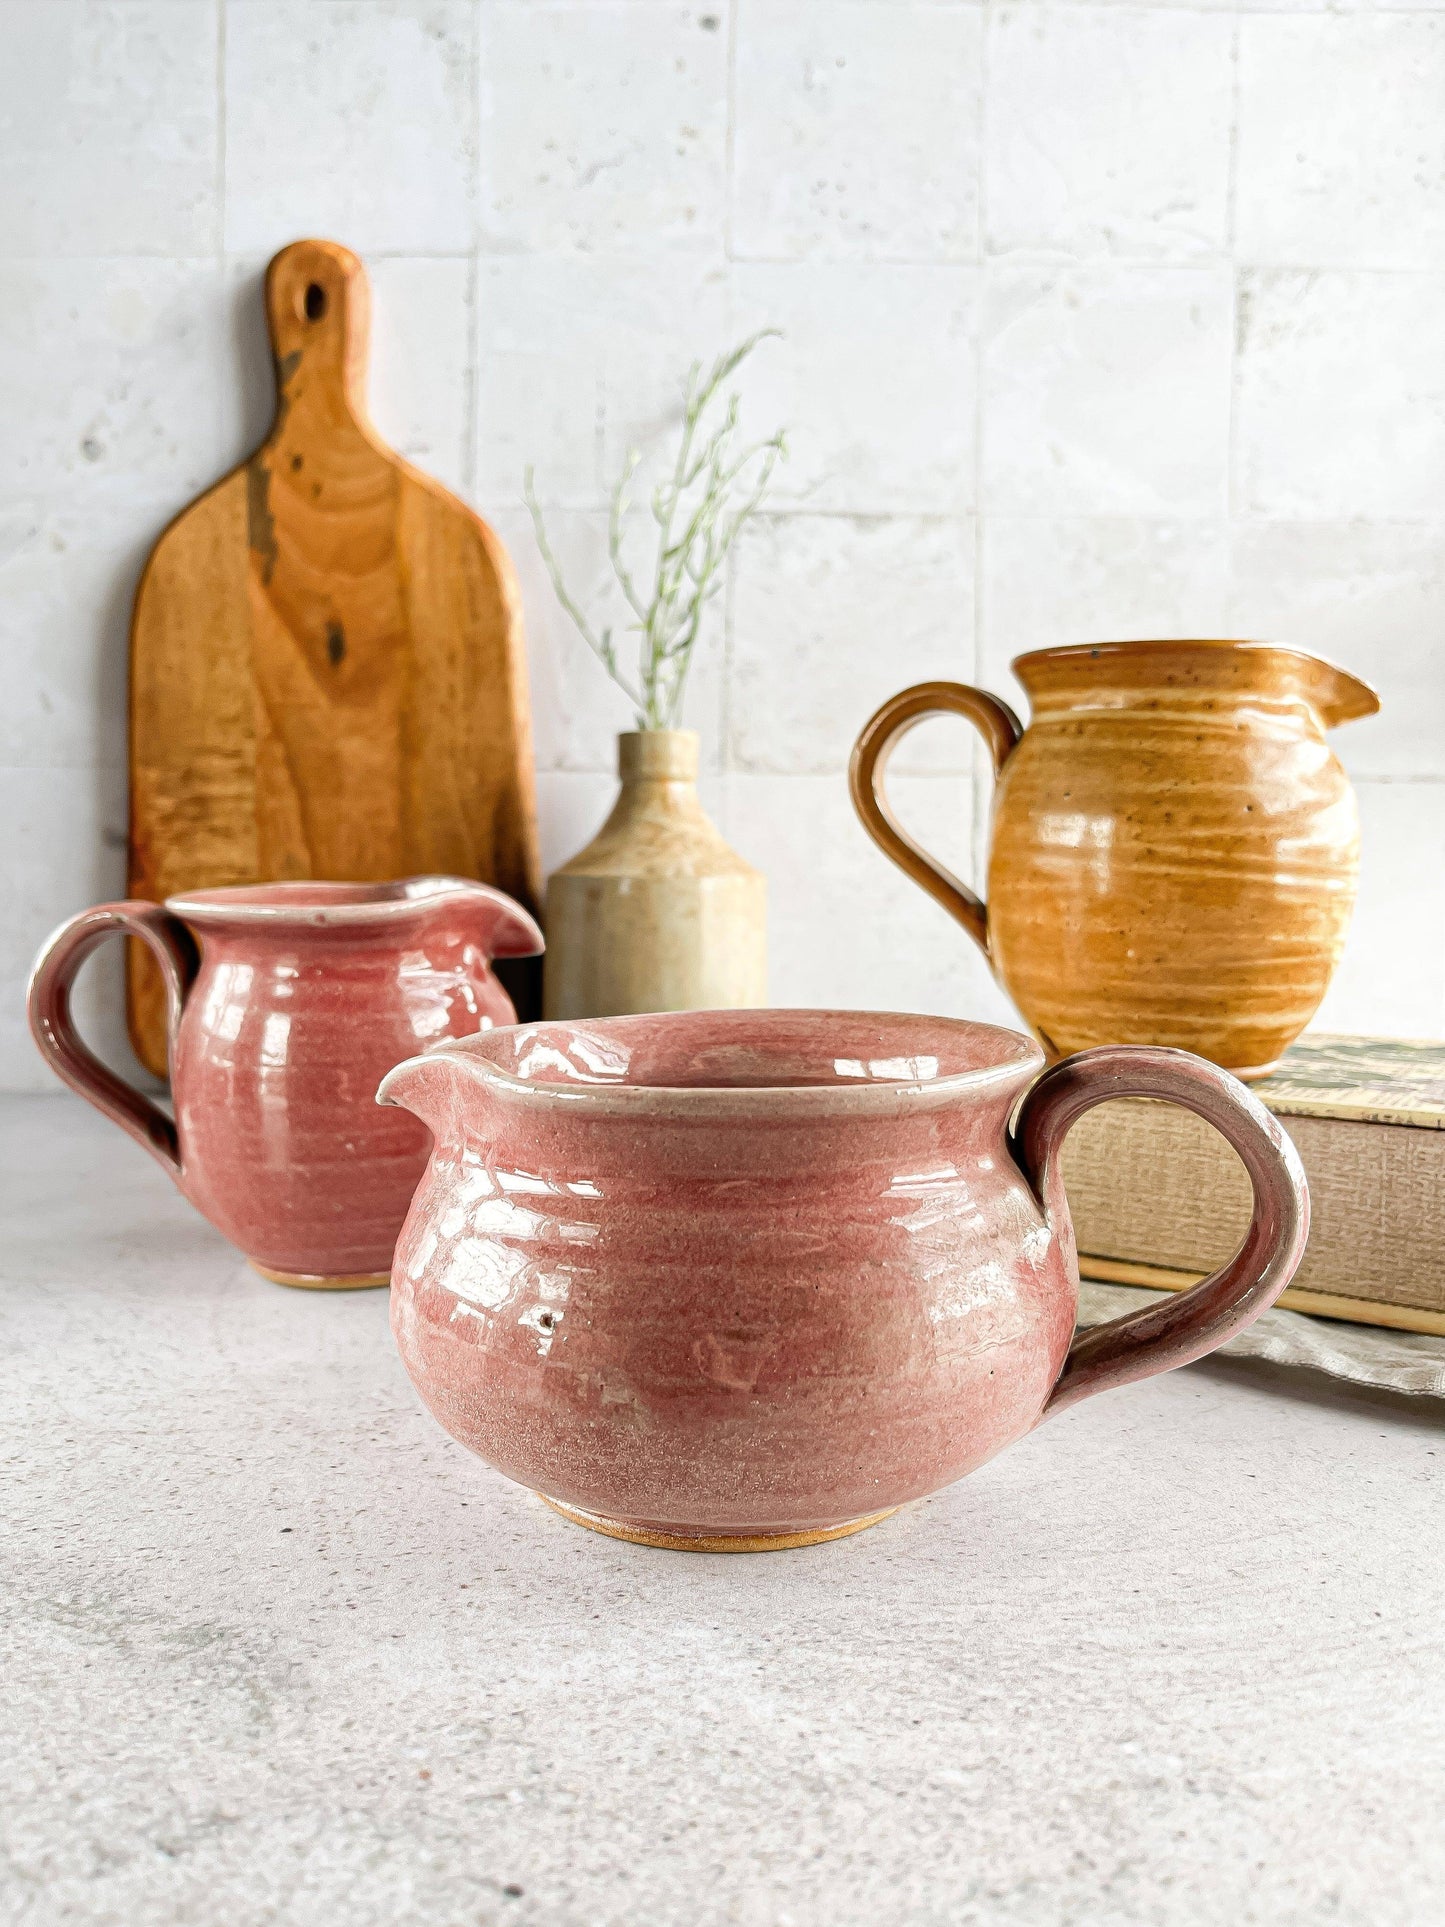 Handcrafted Ceramic Creamers - Artisanal Earthy Tones Collection - SOSC Home